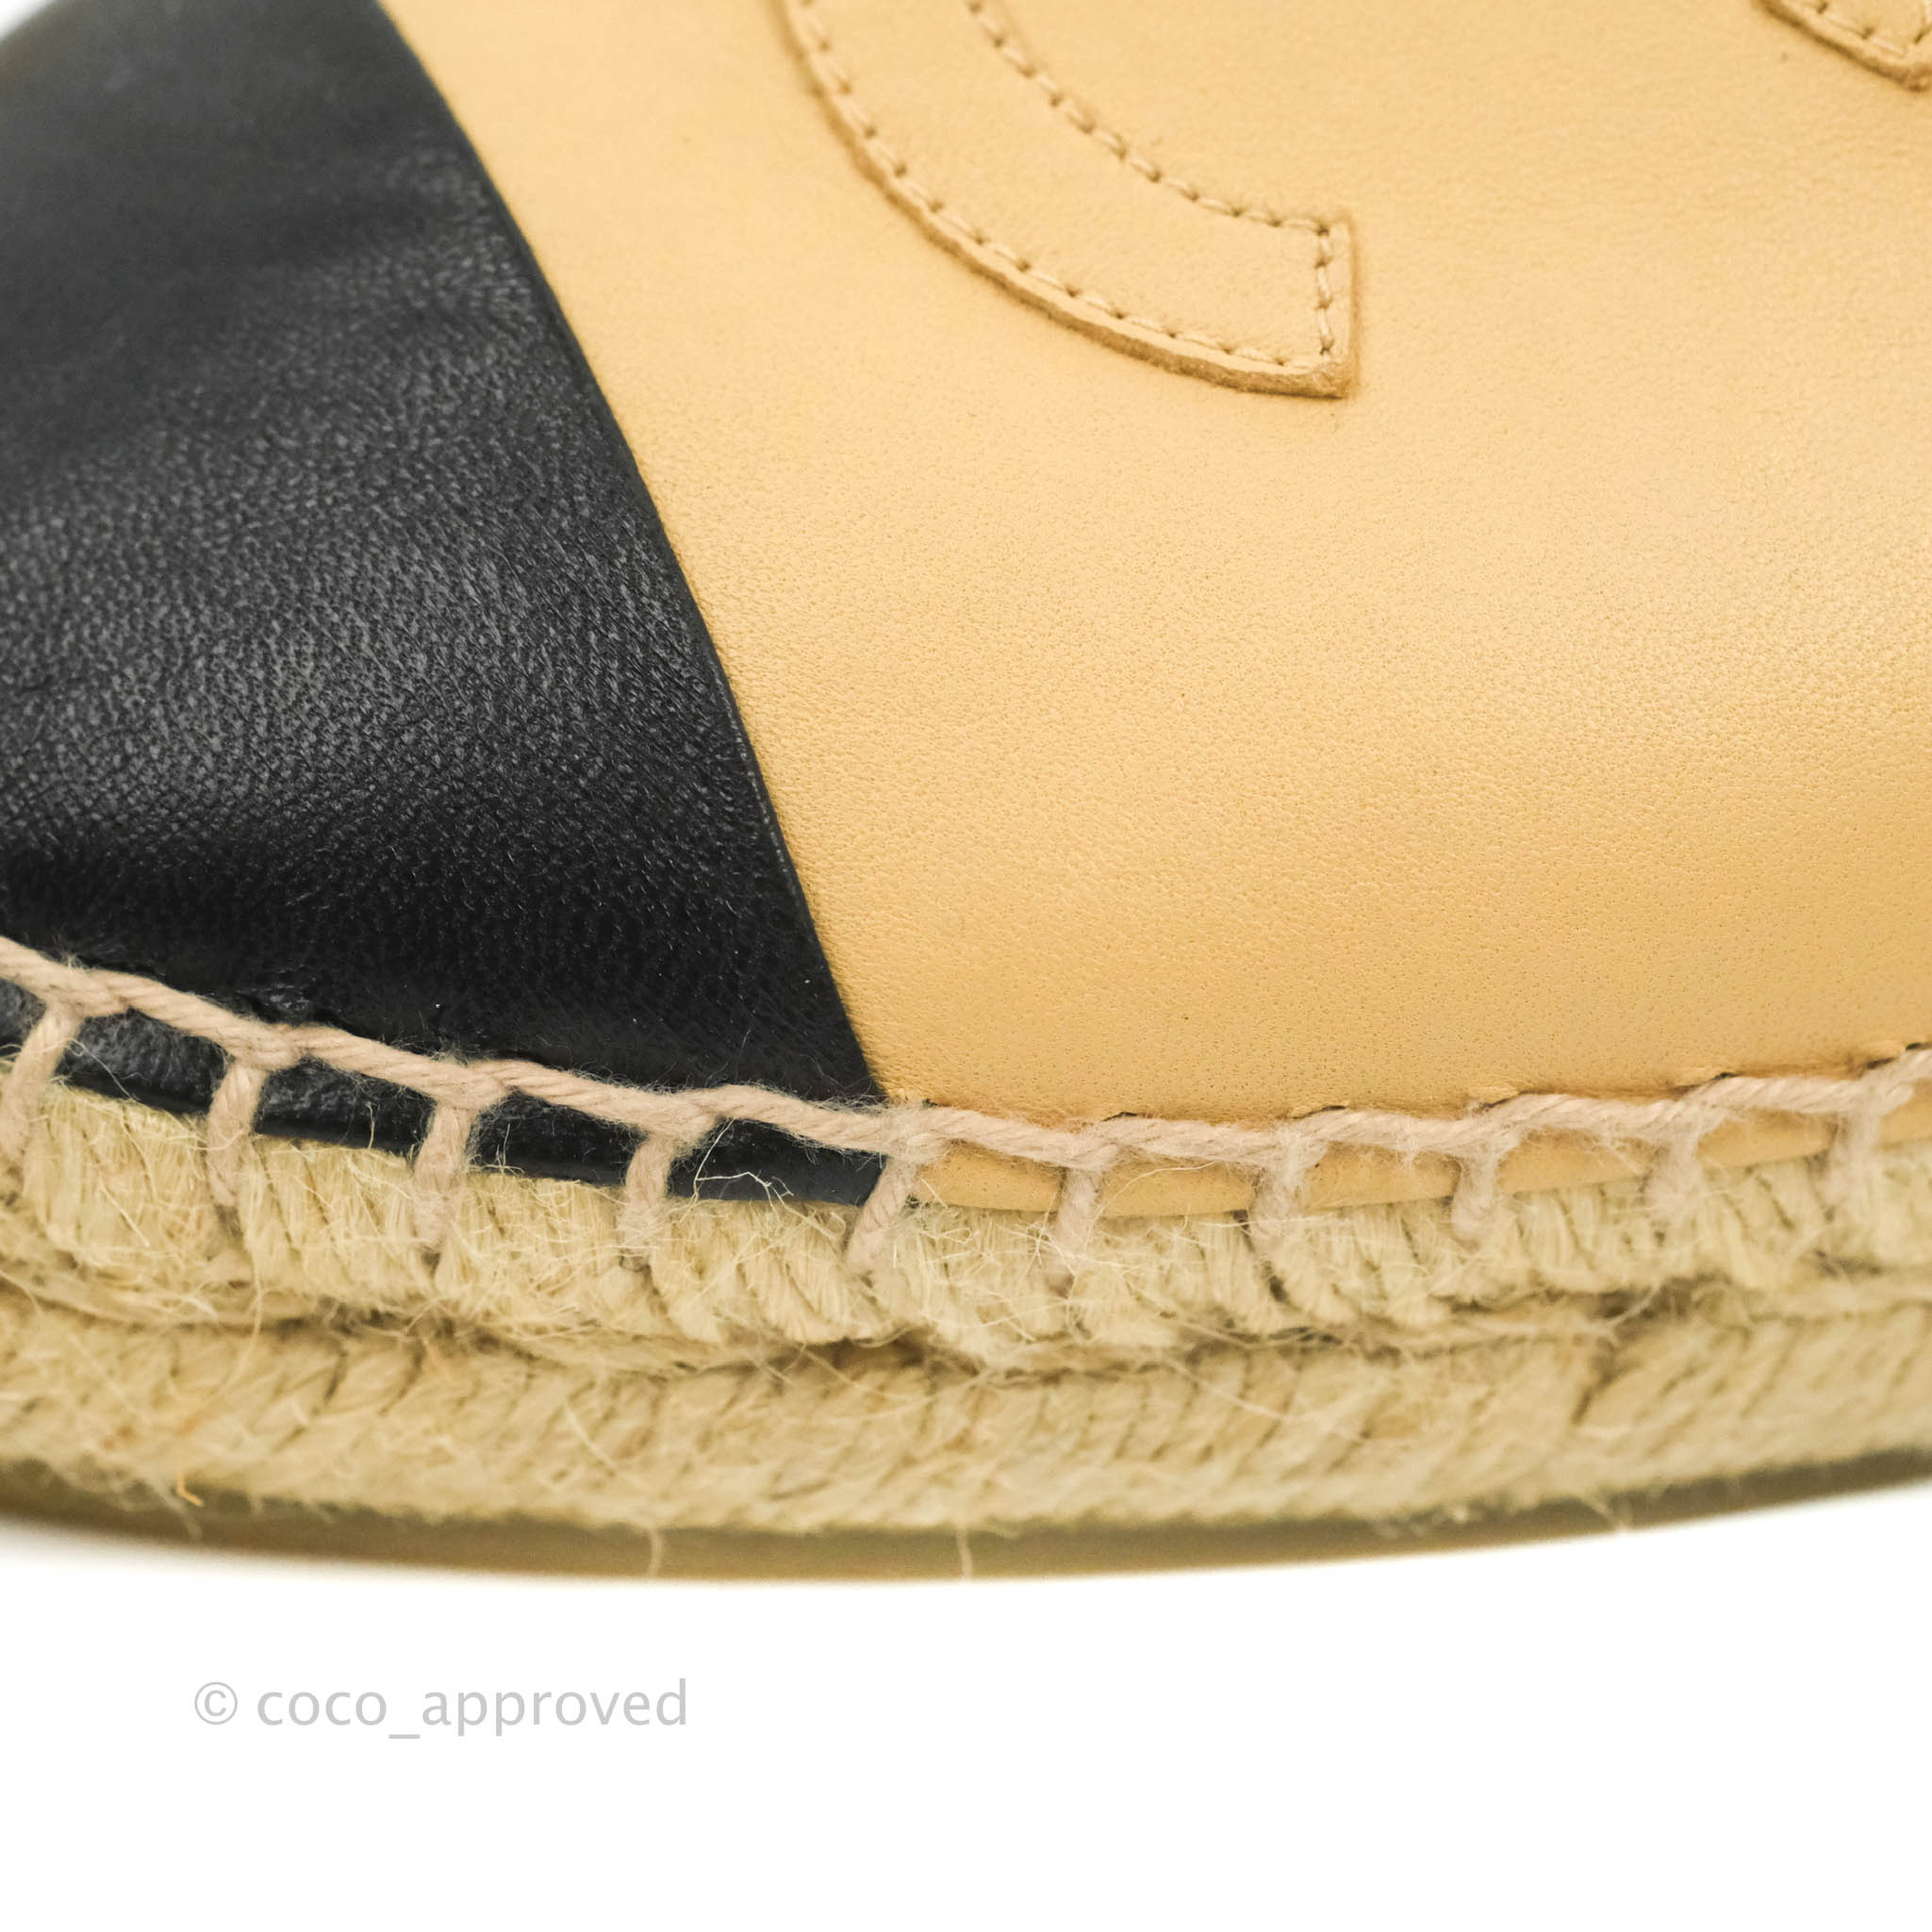 Chanel Espadrille Beige Black Leather Size 37 – Coco Approved Studio